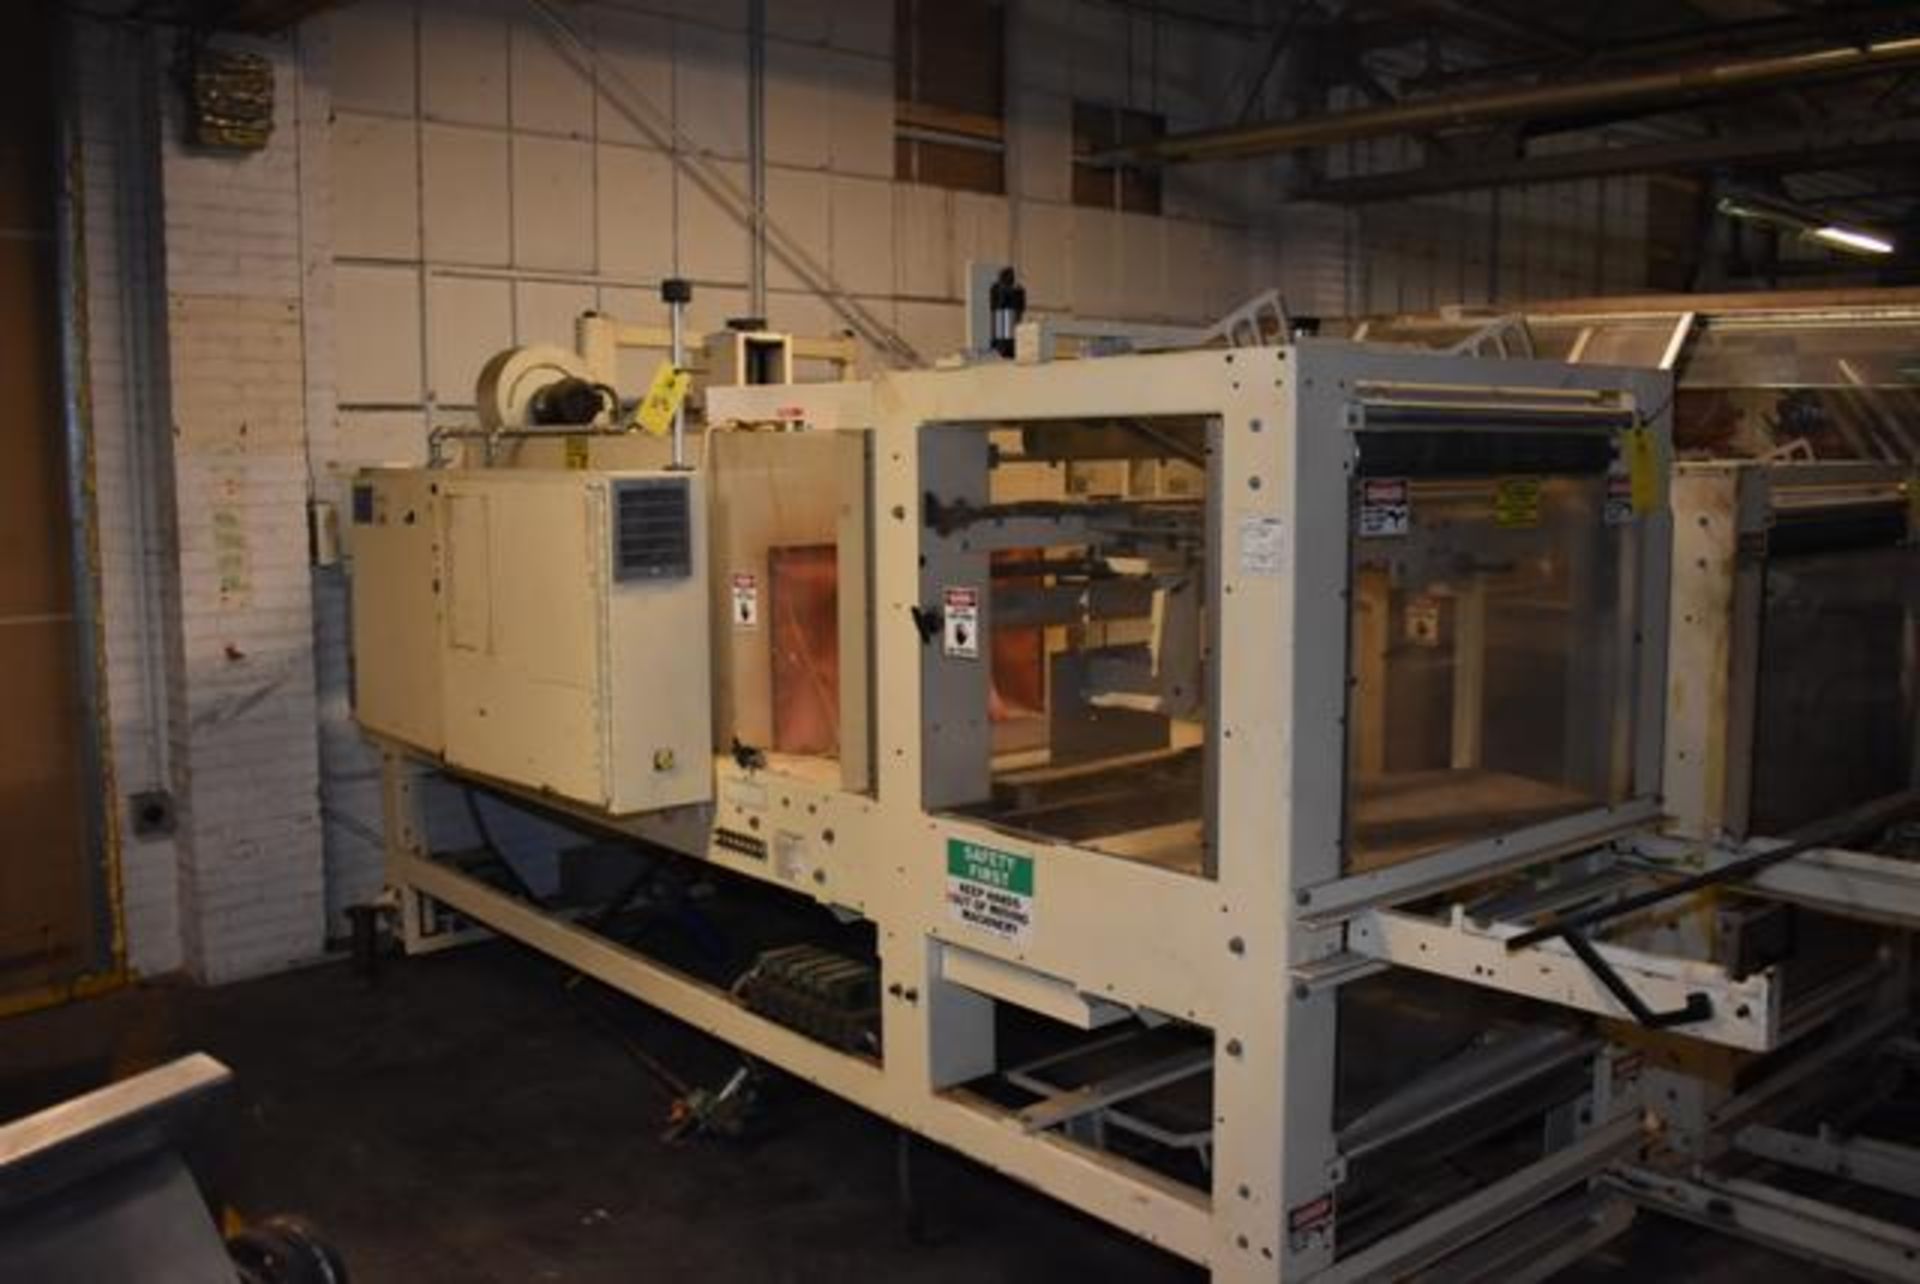 ARPAC Model #108=28 Shrink Wrap Bundler, Serial #3570 | Required Rigging and Loading Fee: $400